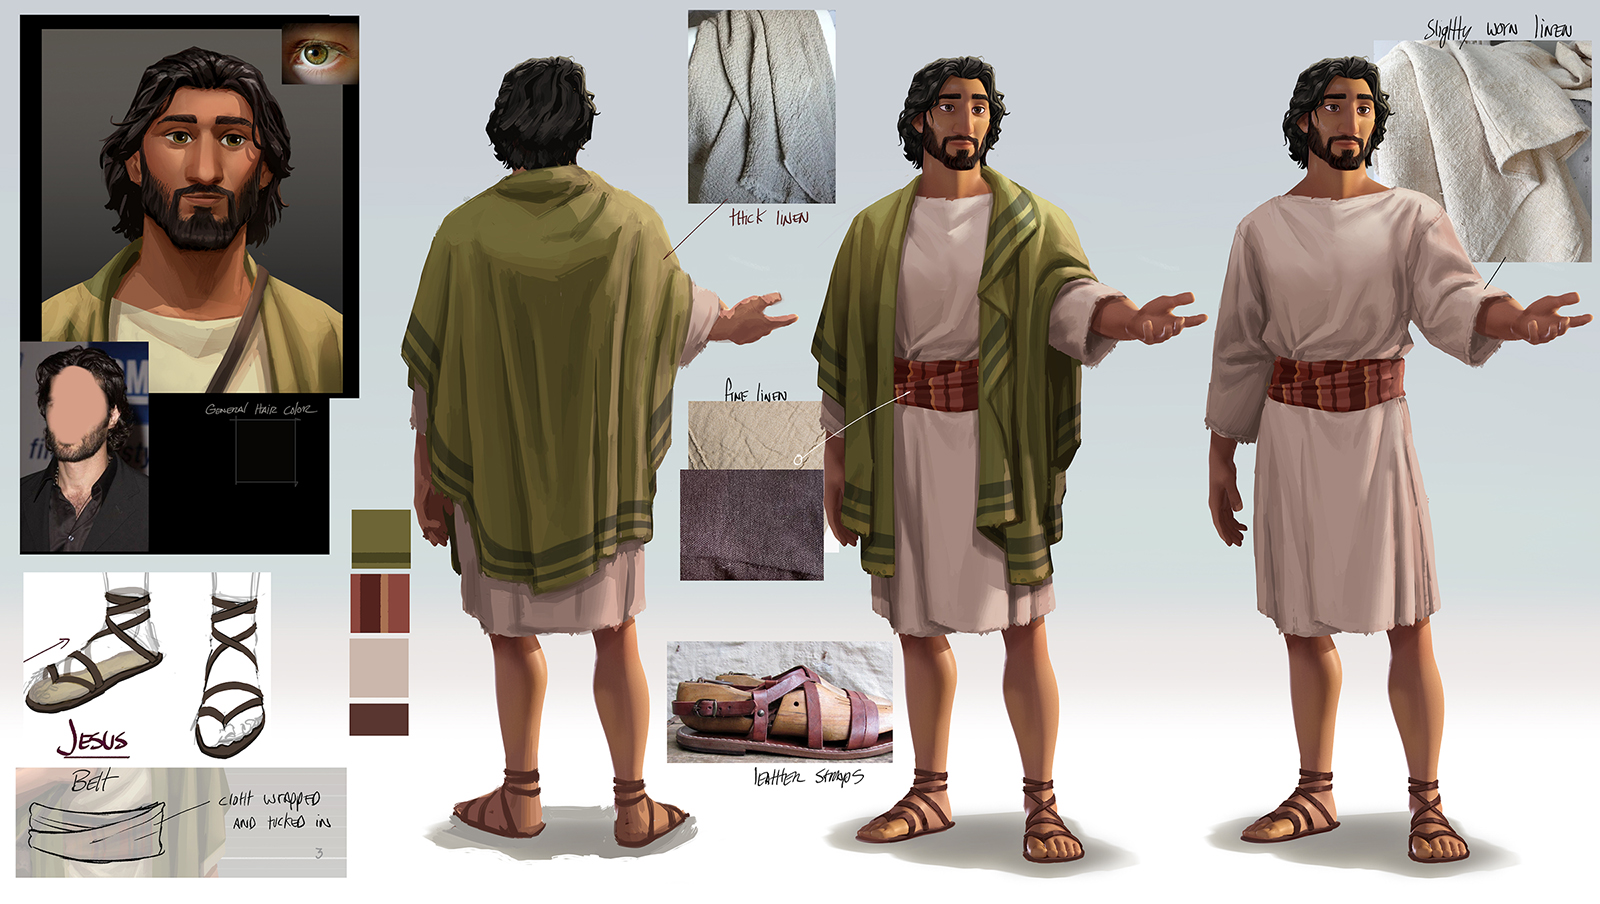 A "concept image" of the Jesus character from the forthcoming animated version of the classic "Jesus." (Image courtesy Jesus Film Project)